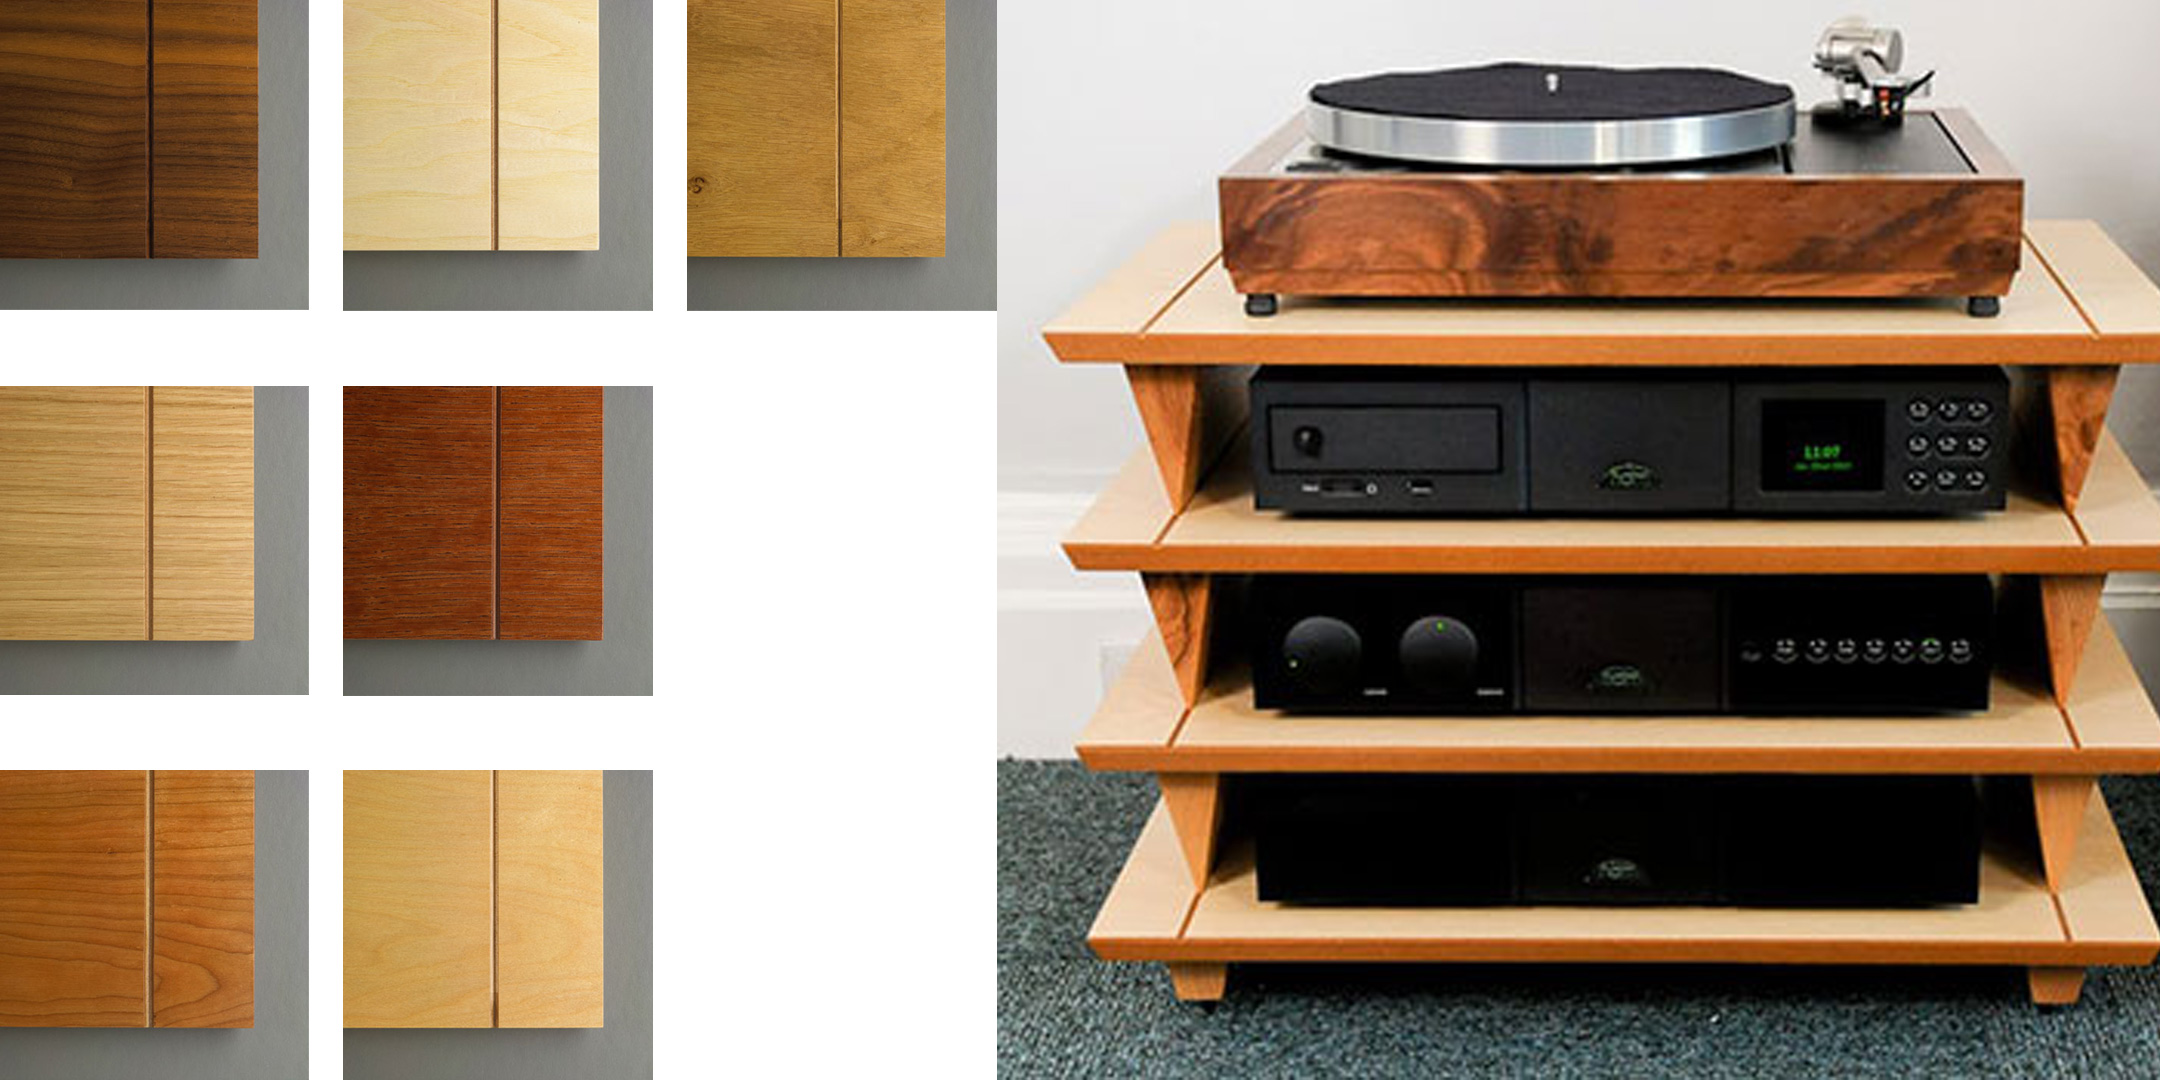 Pic showing an Isoblue 60 Series stand in Mahogany wood finish alongside the other colour variations